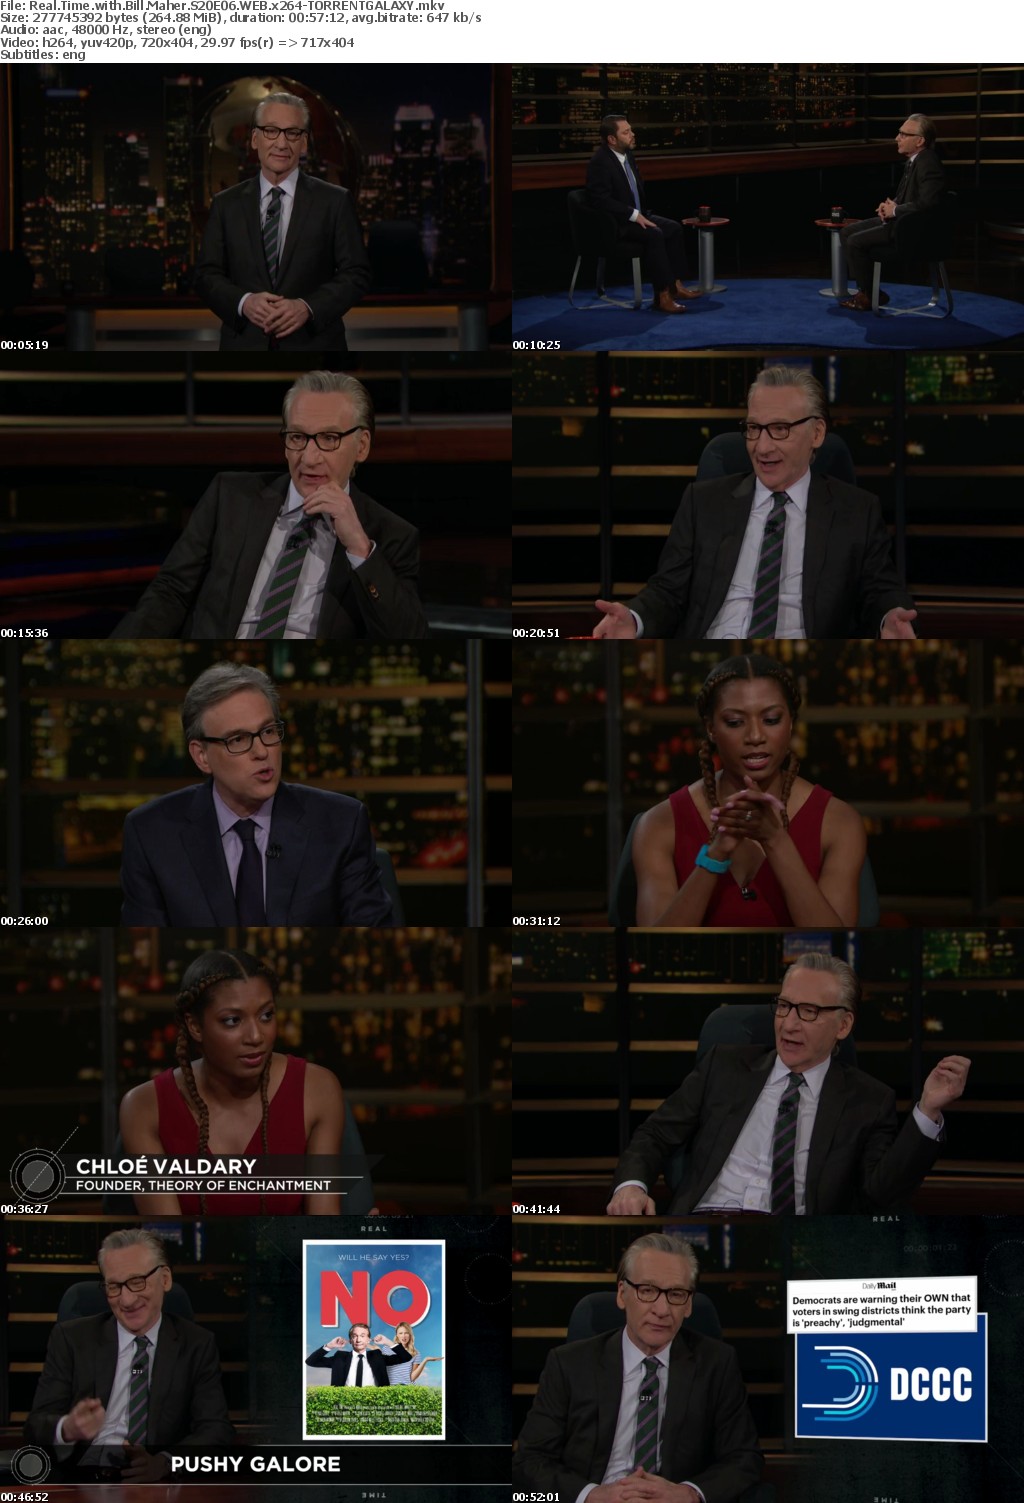 Real Time with Bill Maher S20E06 WEB x264-GALAXY